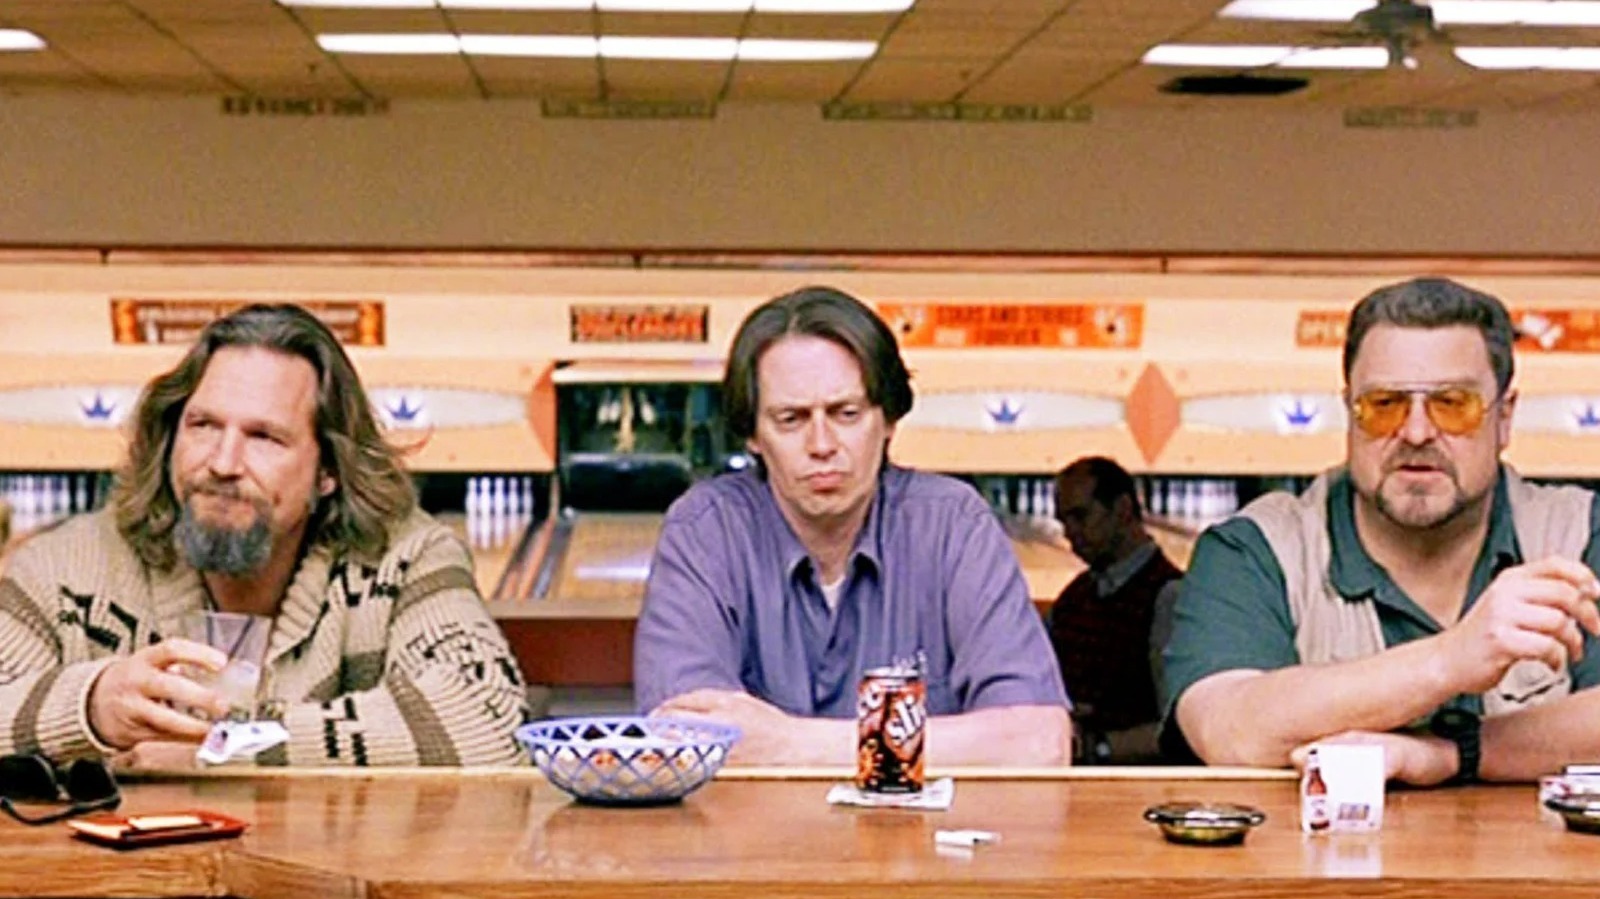 The Big Lebowski Is Coming Back To Theaters For Its 25th Anniversary